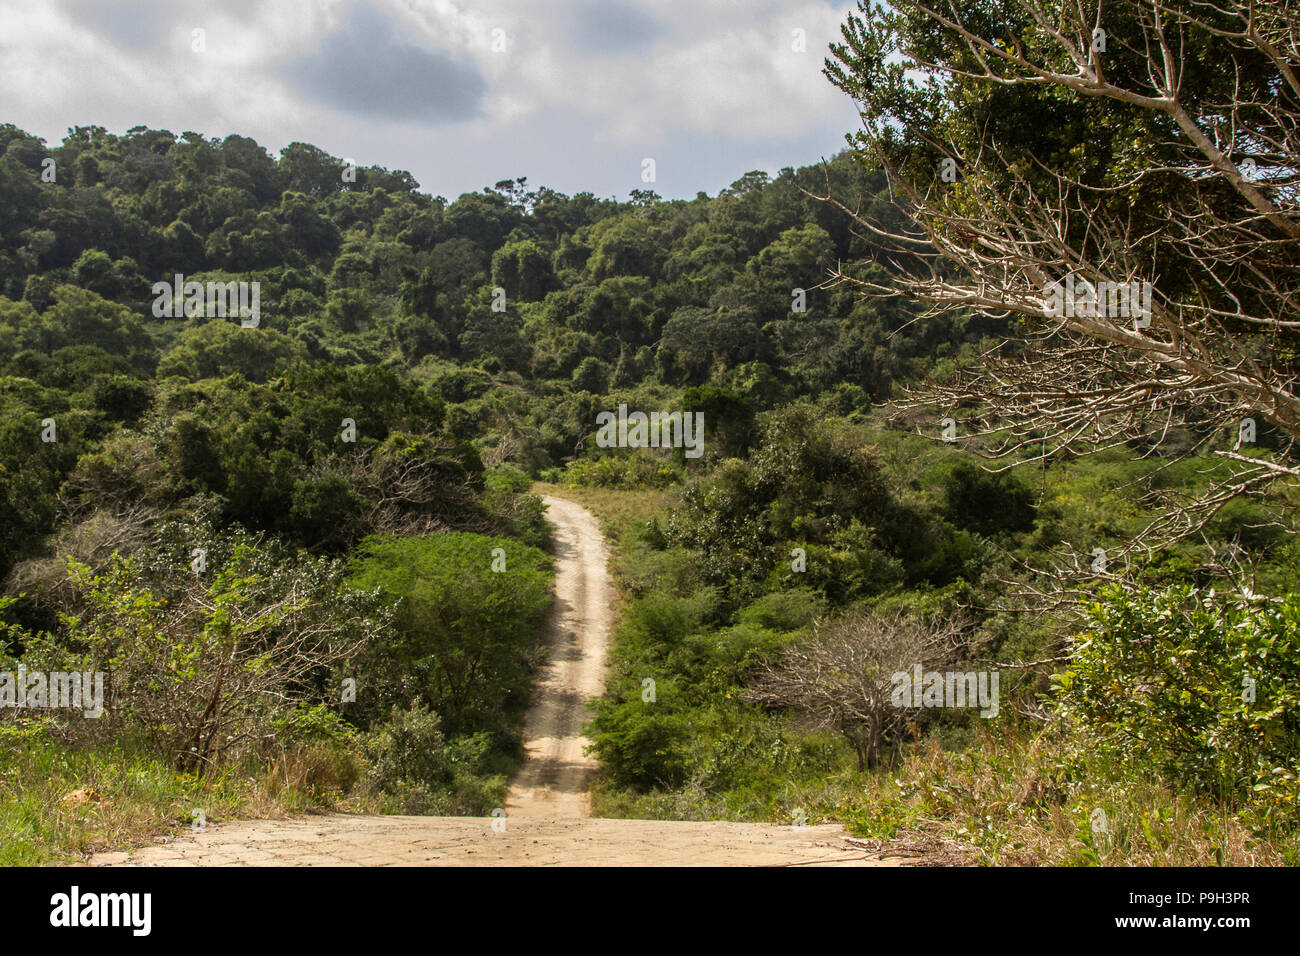 A dirt track heading through the dense woodland of the St Lucia  iSimangaliso Wetlands park in South Africa. Stock Photo